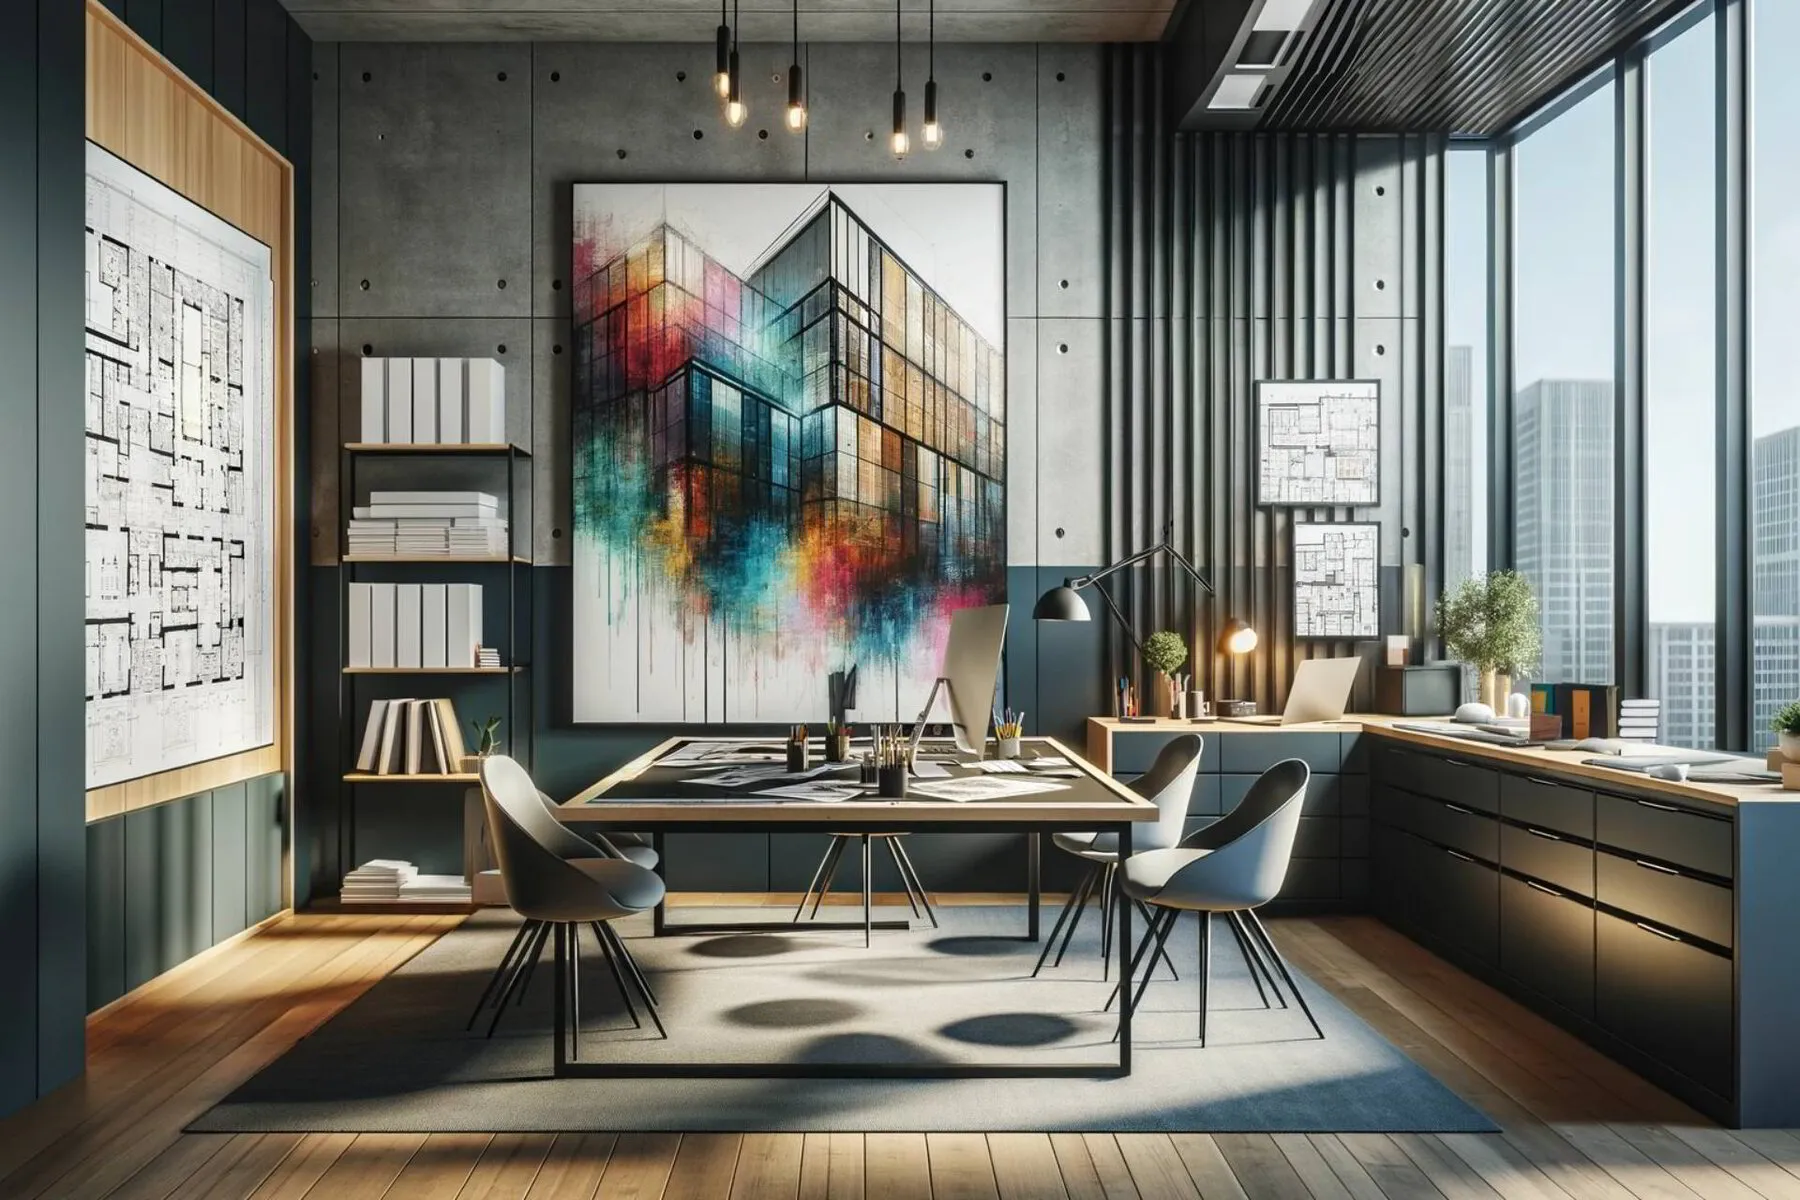 A modern interior design office scene, with a focus on a wall featuring a large, abstract painting